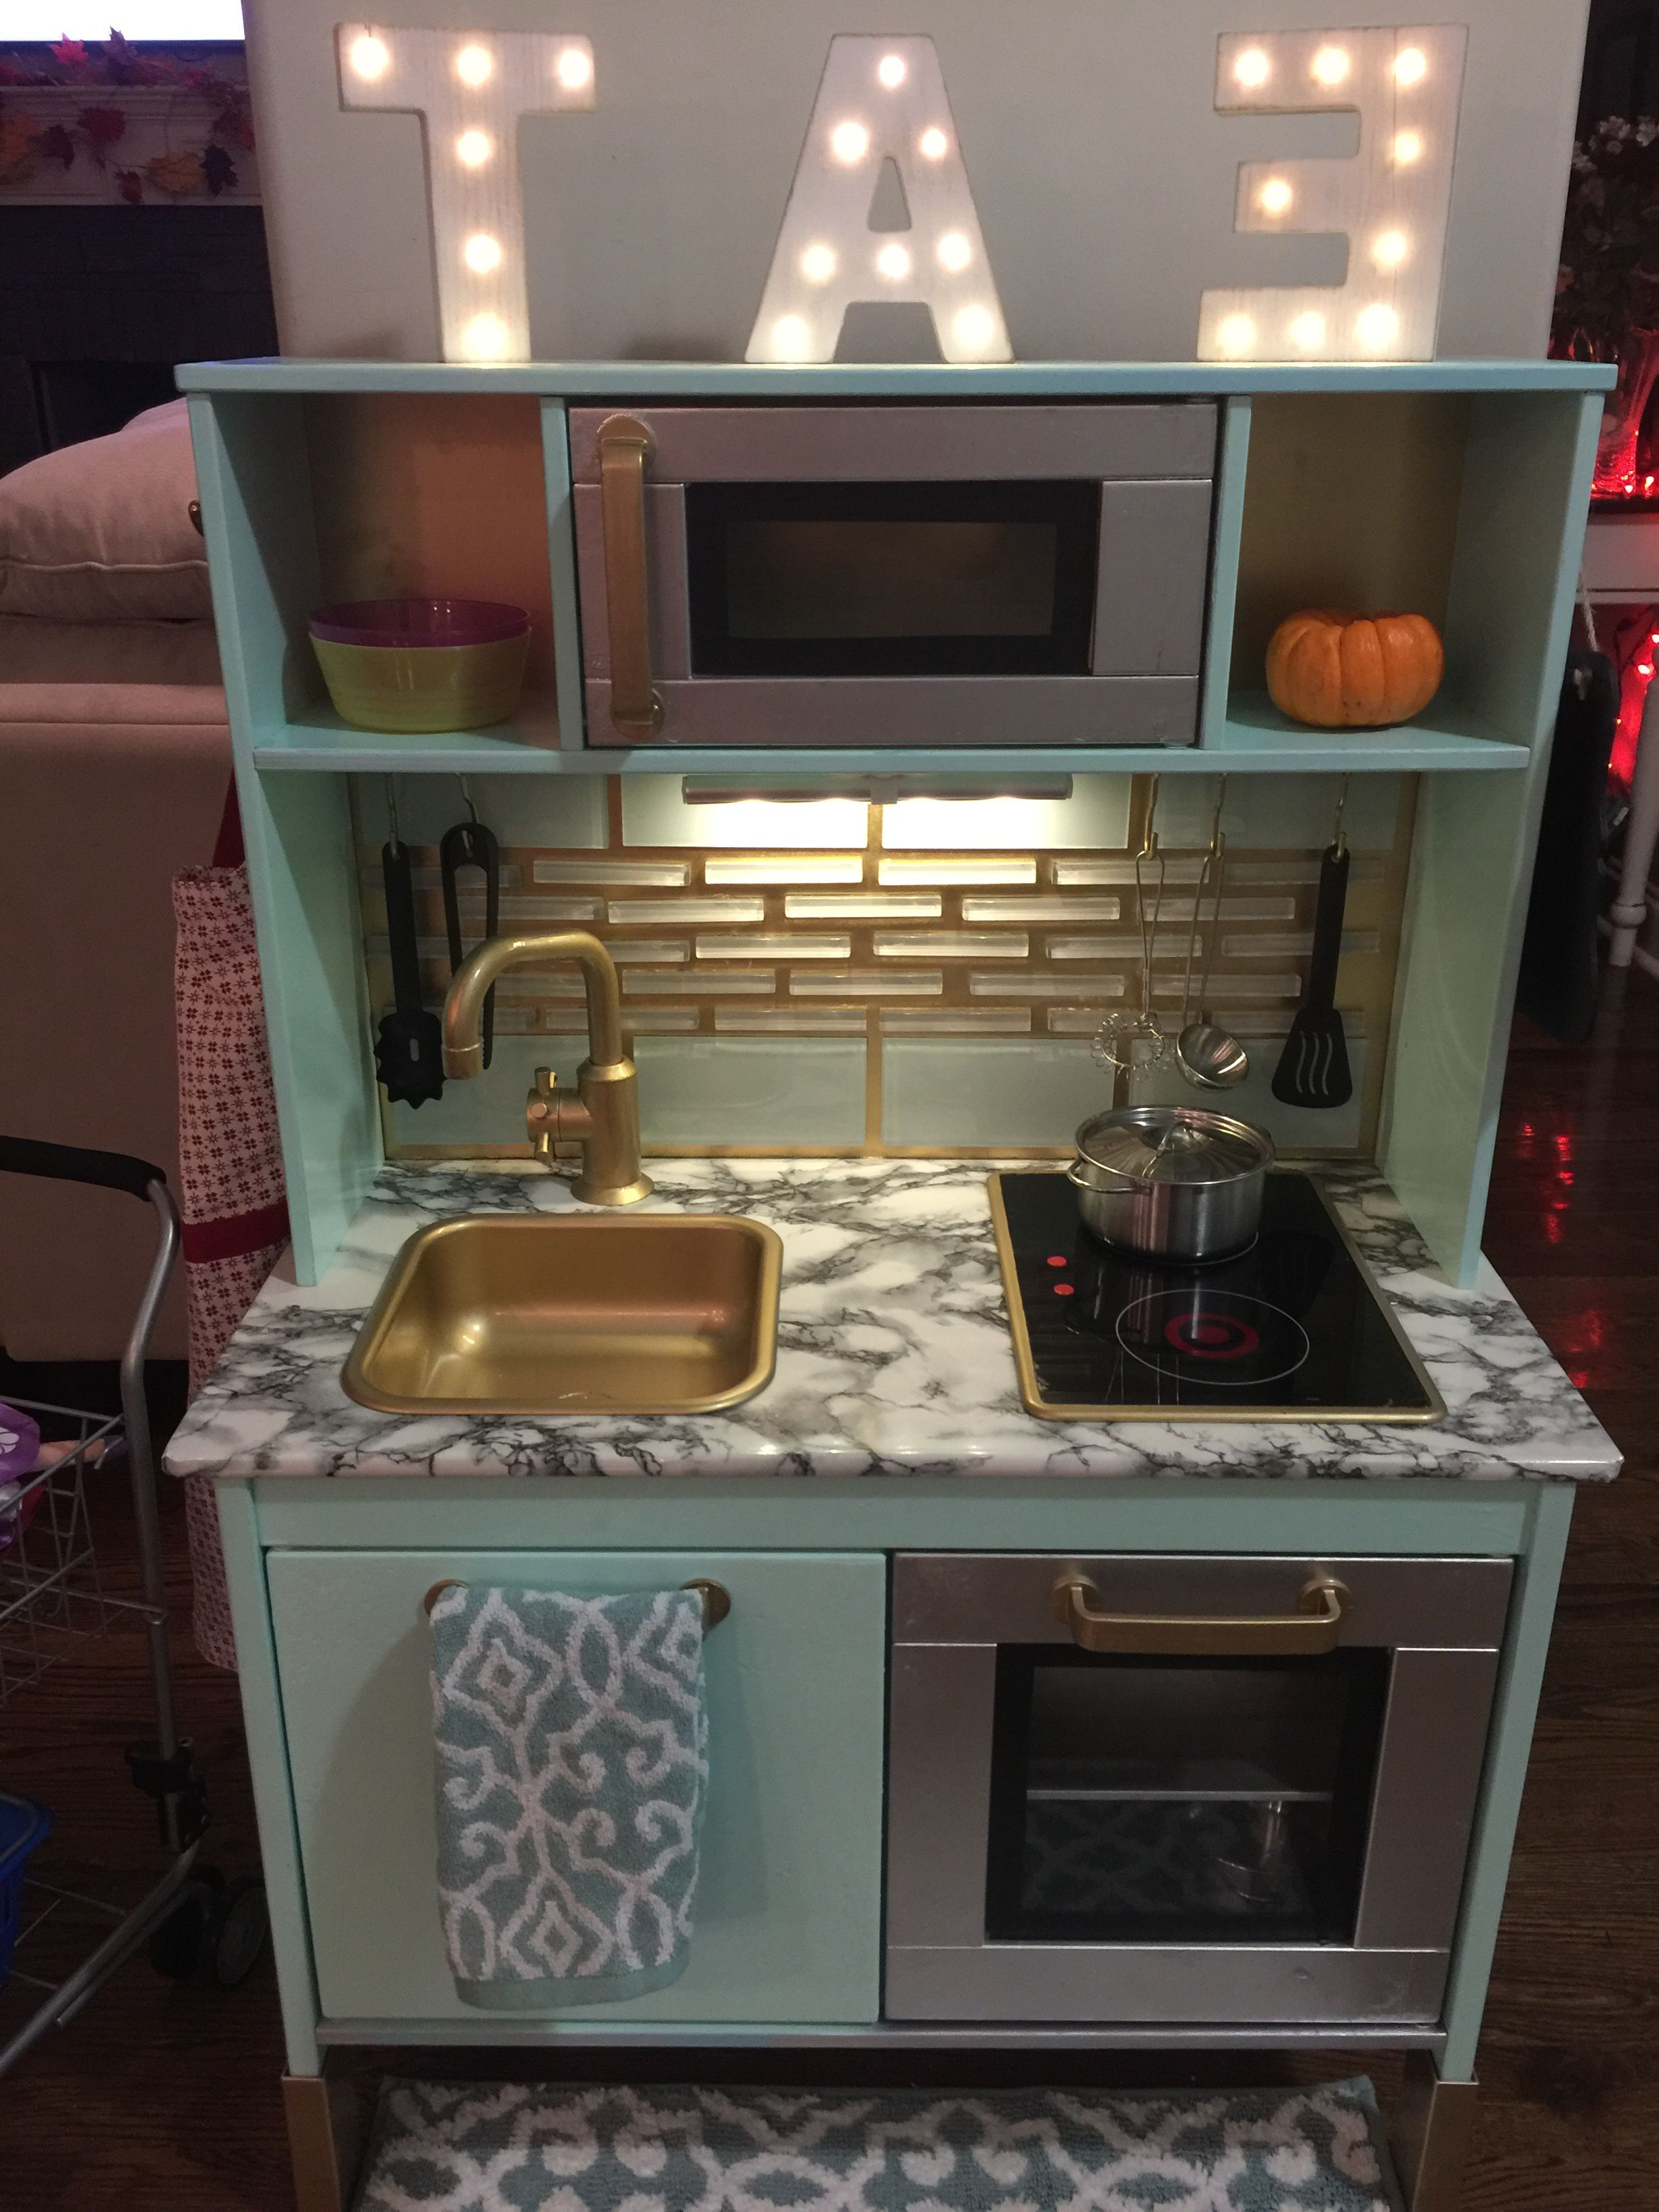 This Kitchen Set From Ikea Turned Out Amazing I Painted